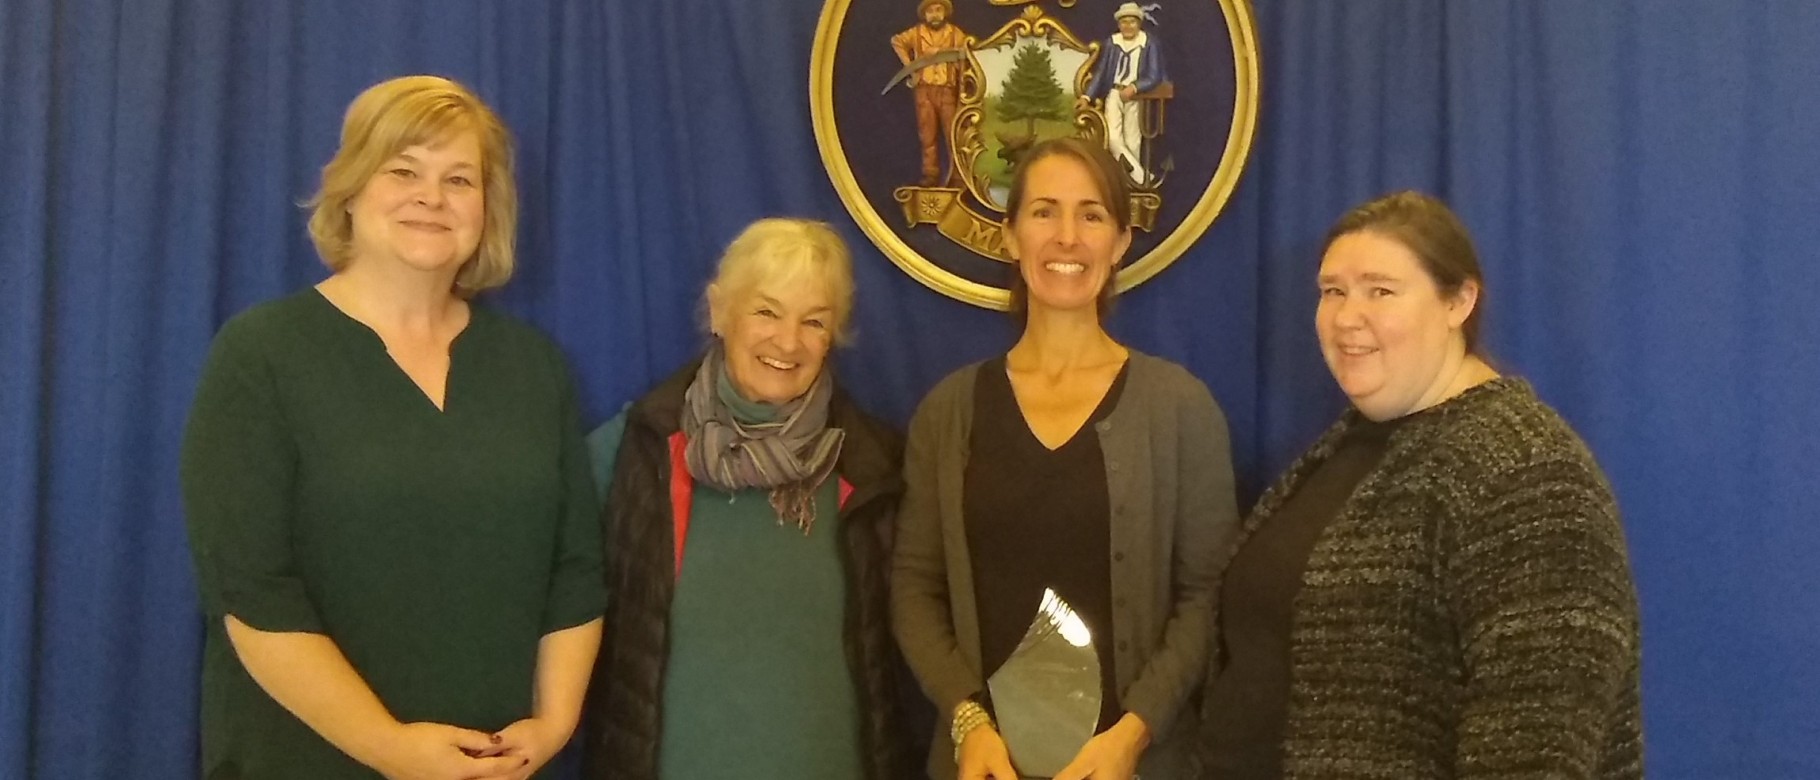 Jen Gunderman (second from left) received the award during a ceremony at the Maine Statehouse